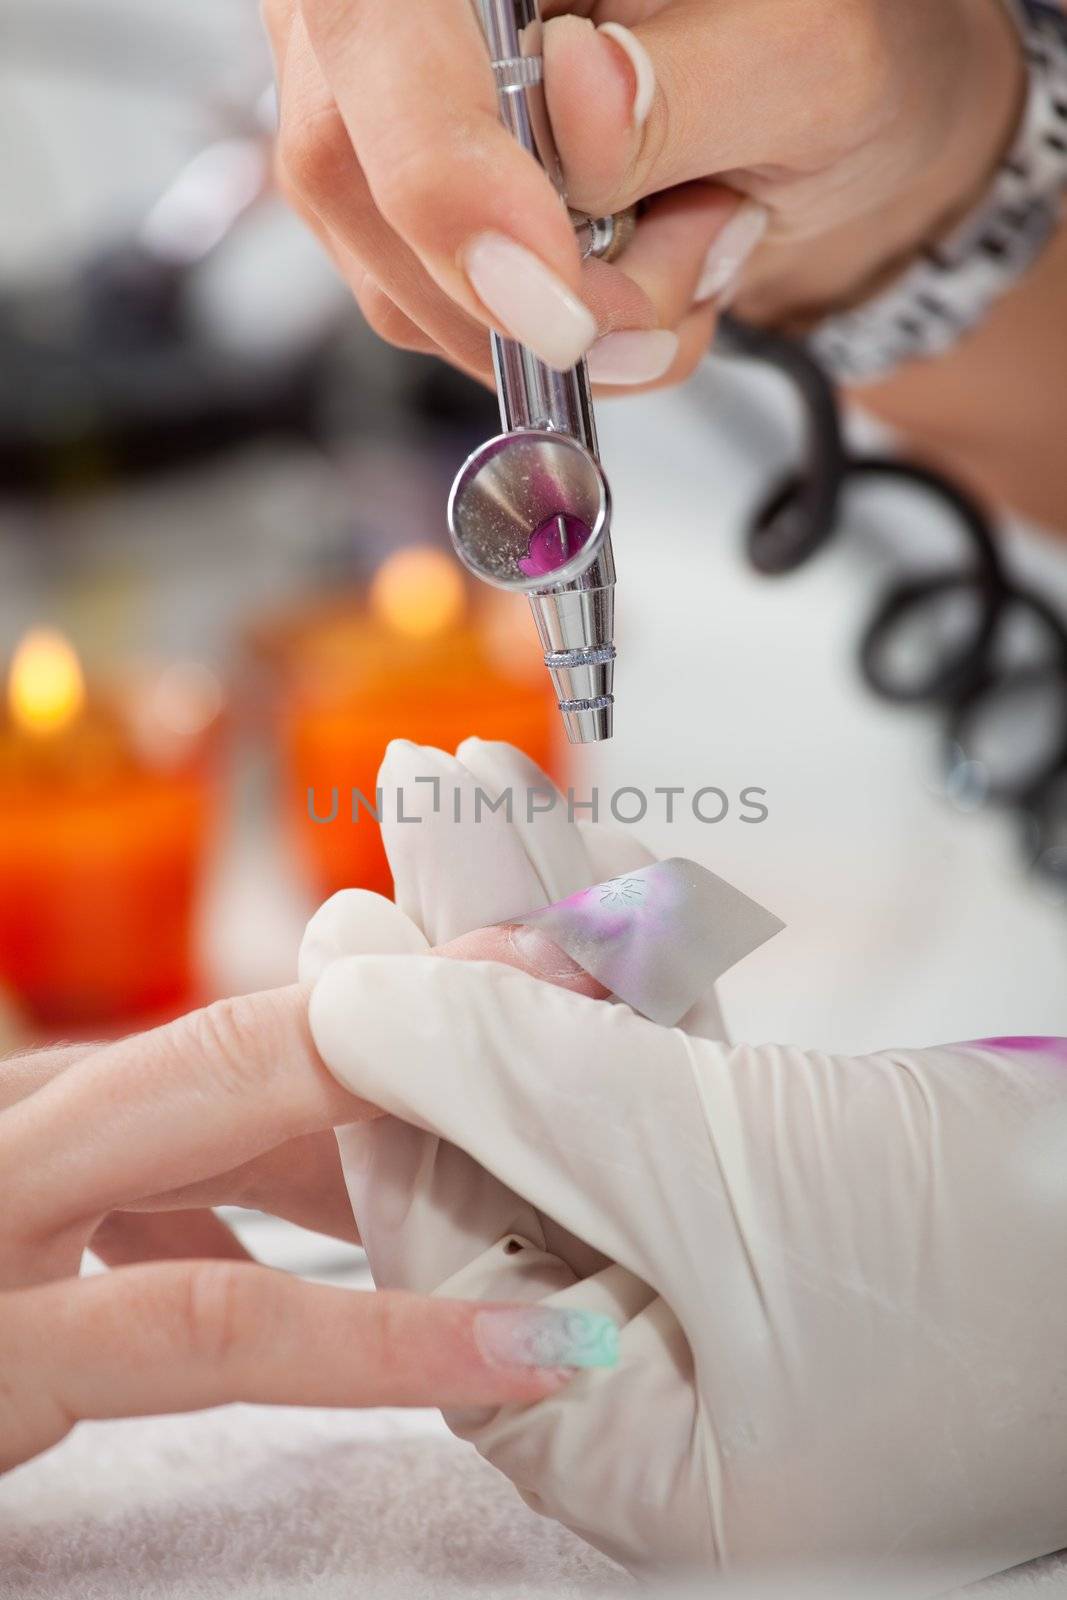 Airbrushing fingernails by AndreyPopov